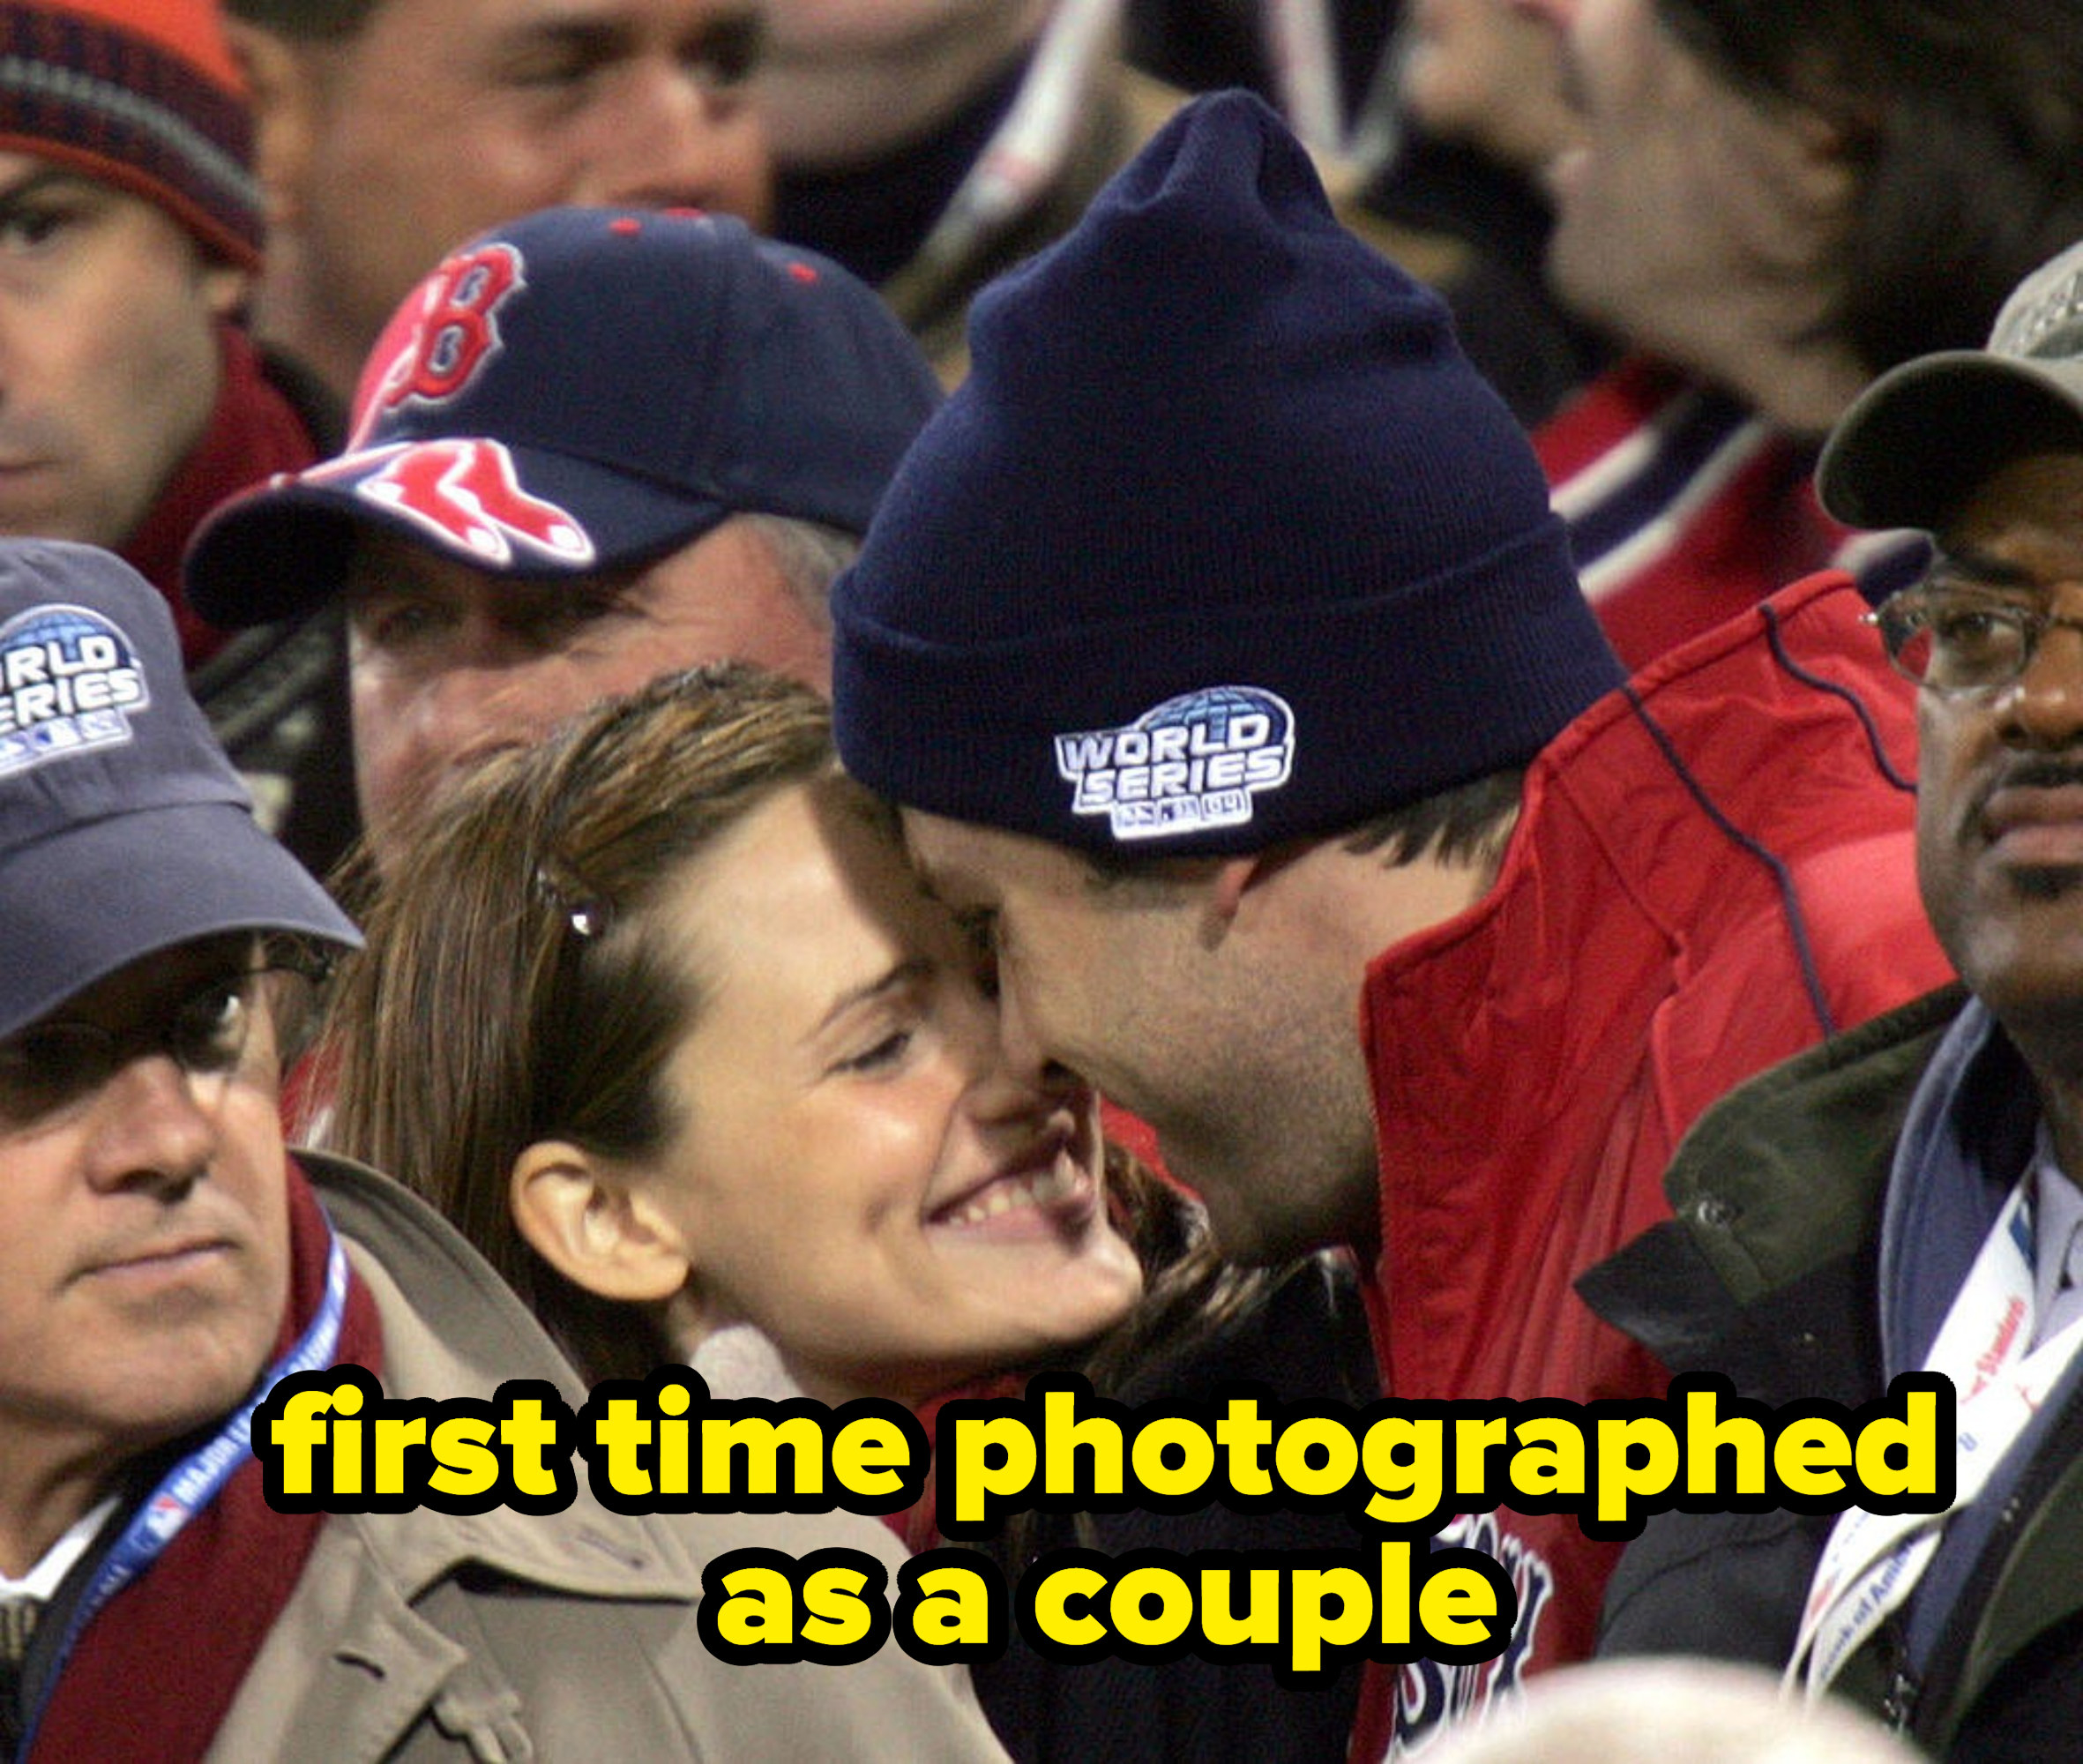 Jennifer and Ben at a game labeled &quot;first time photographed as a couple&quot;